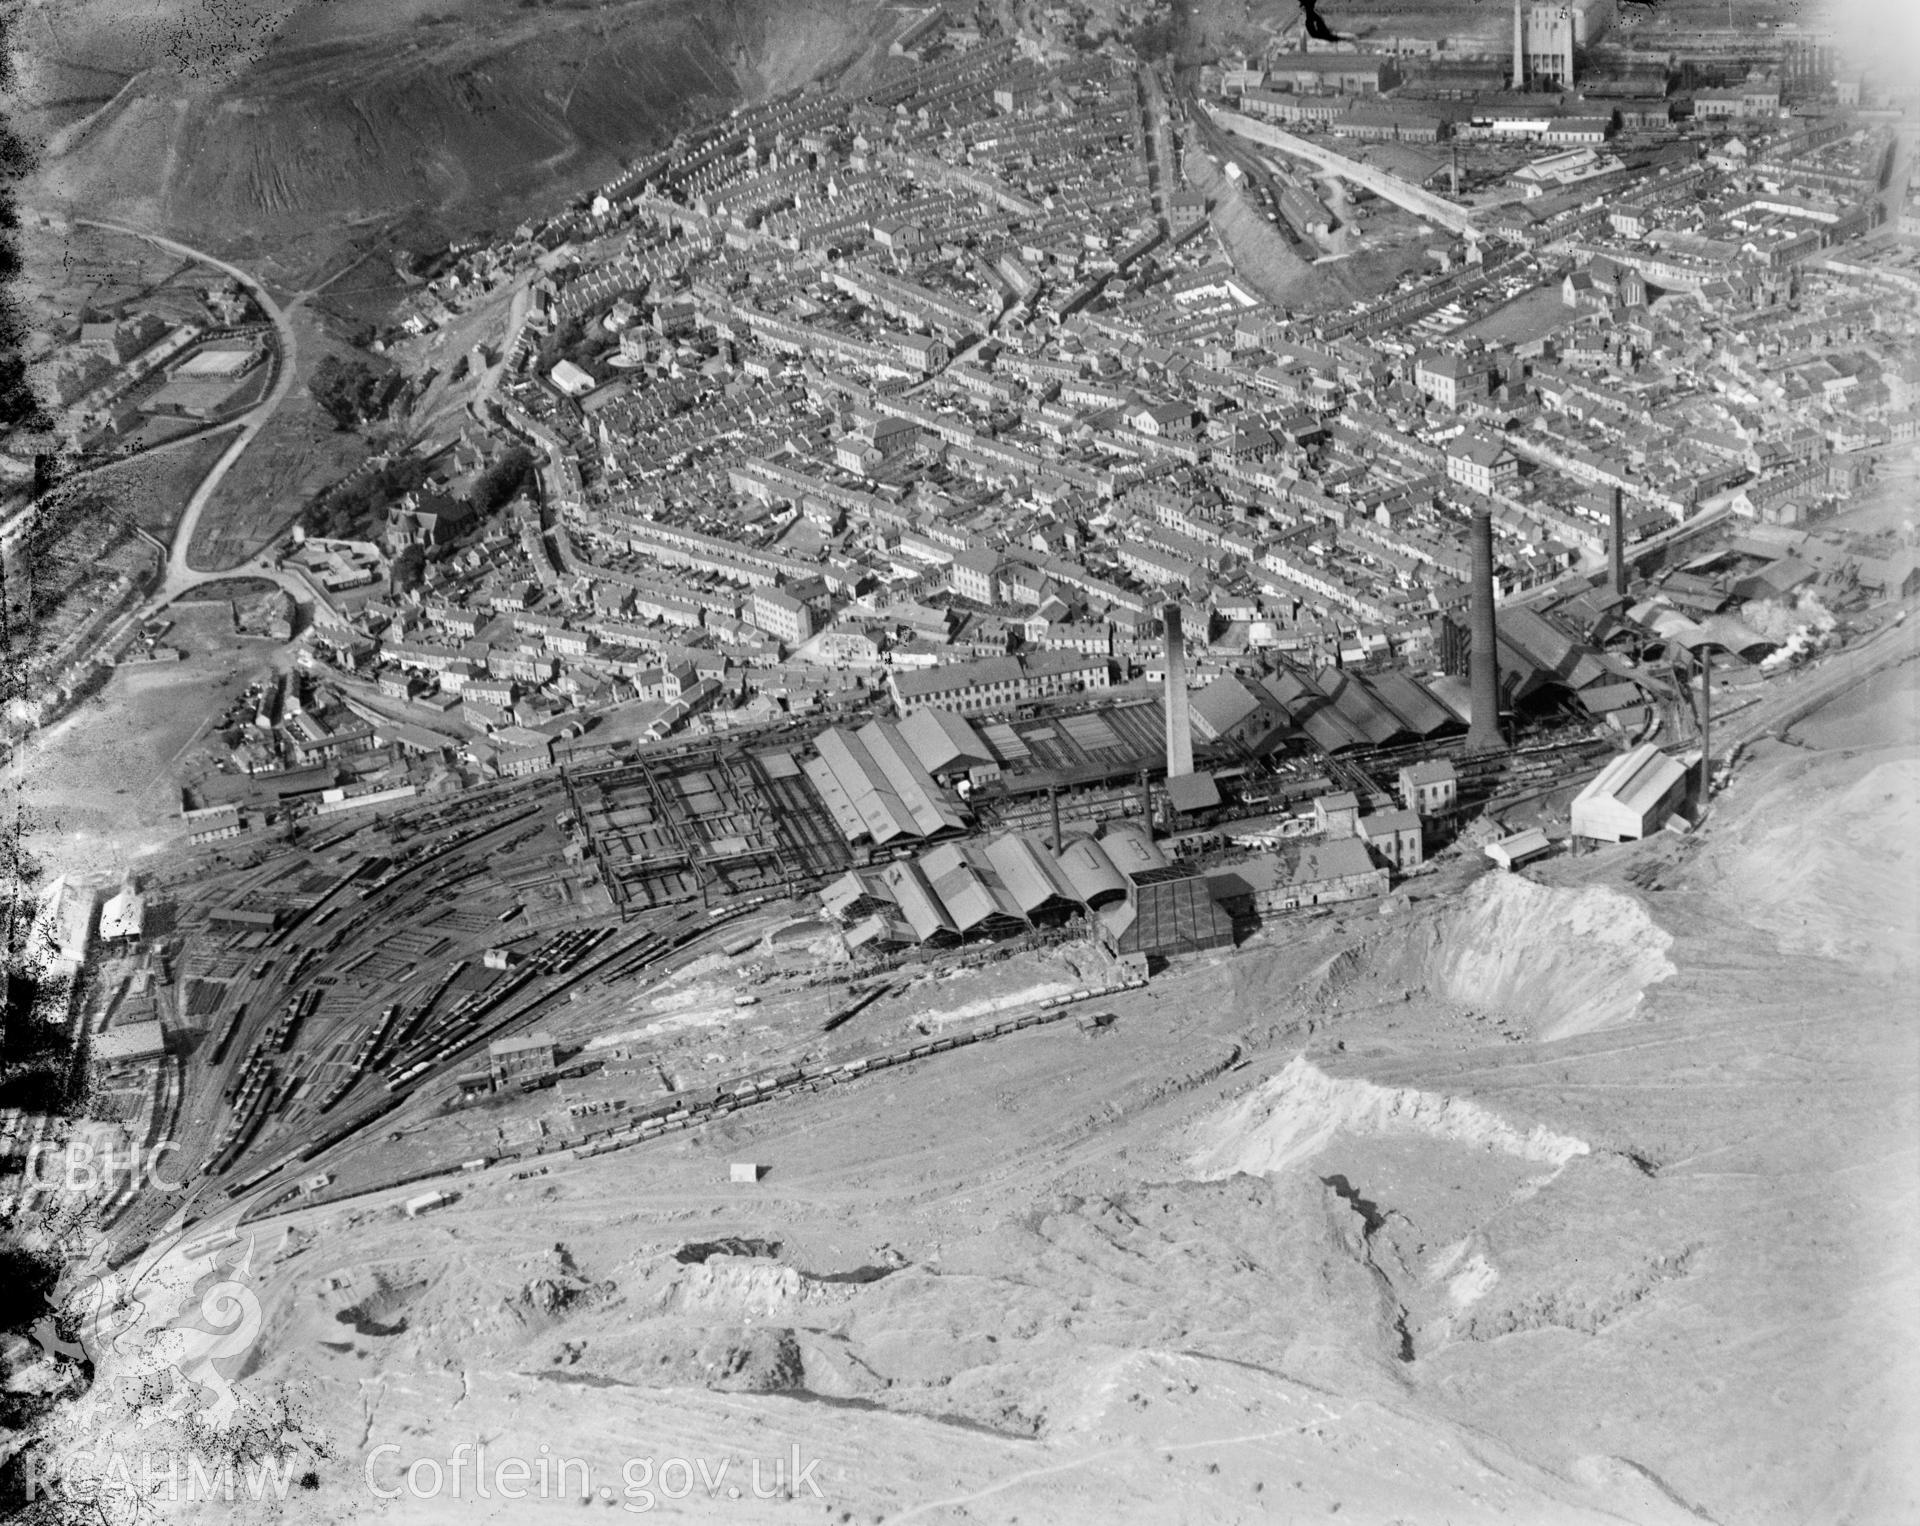 View of Guest, Keen & Nettlefold, Dowlais Works, Merthyr Tydfil, oblique aerial view. 5?x4? black and white glass plate negative.